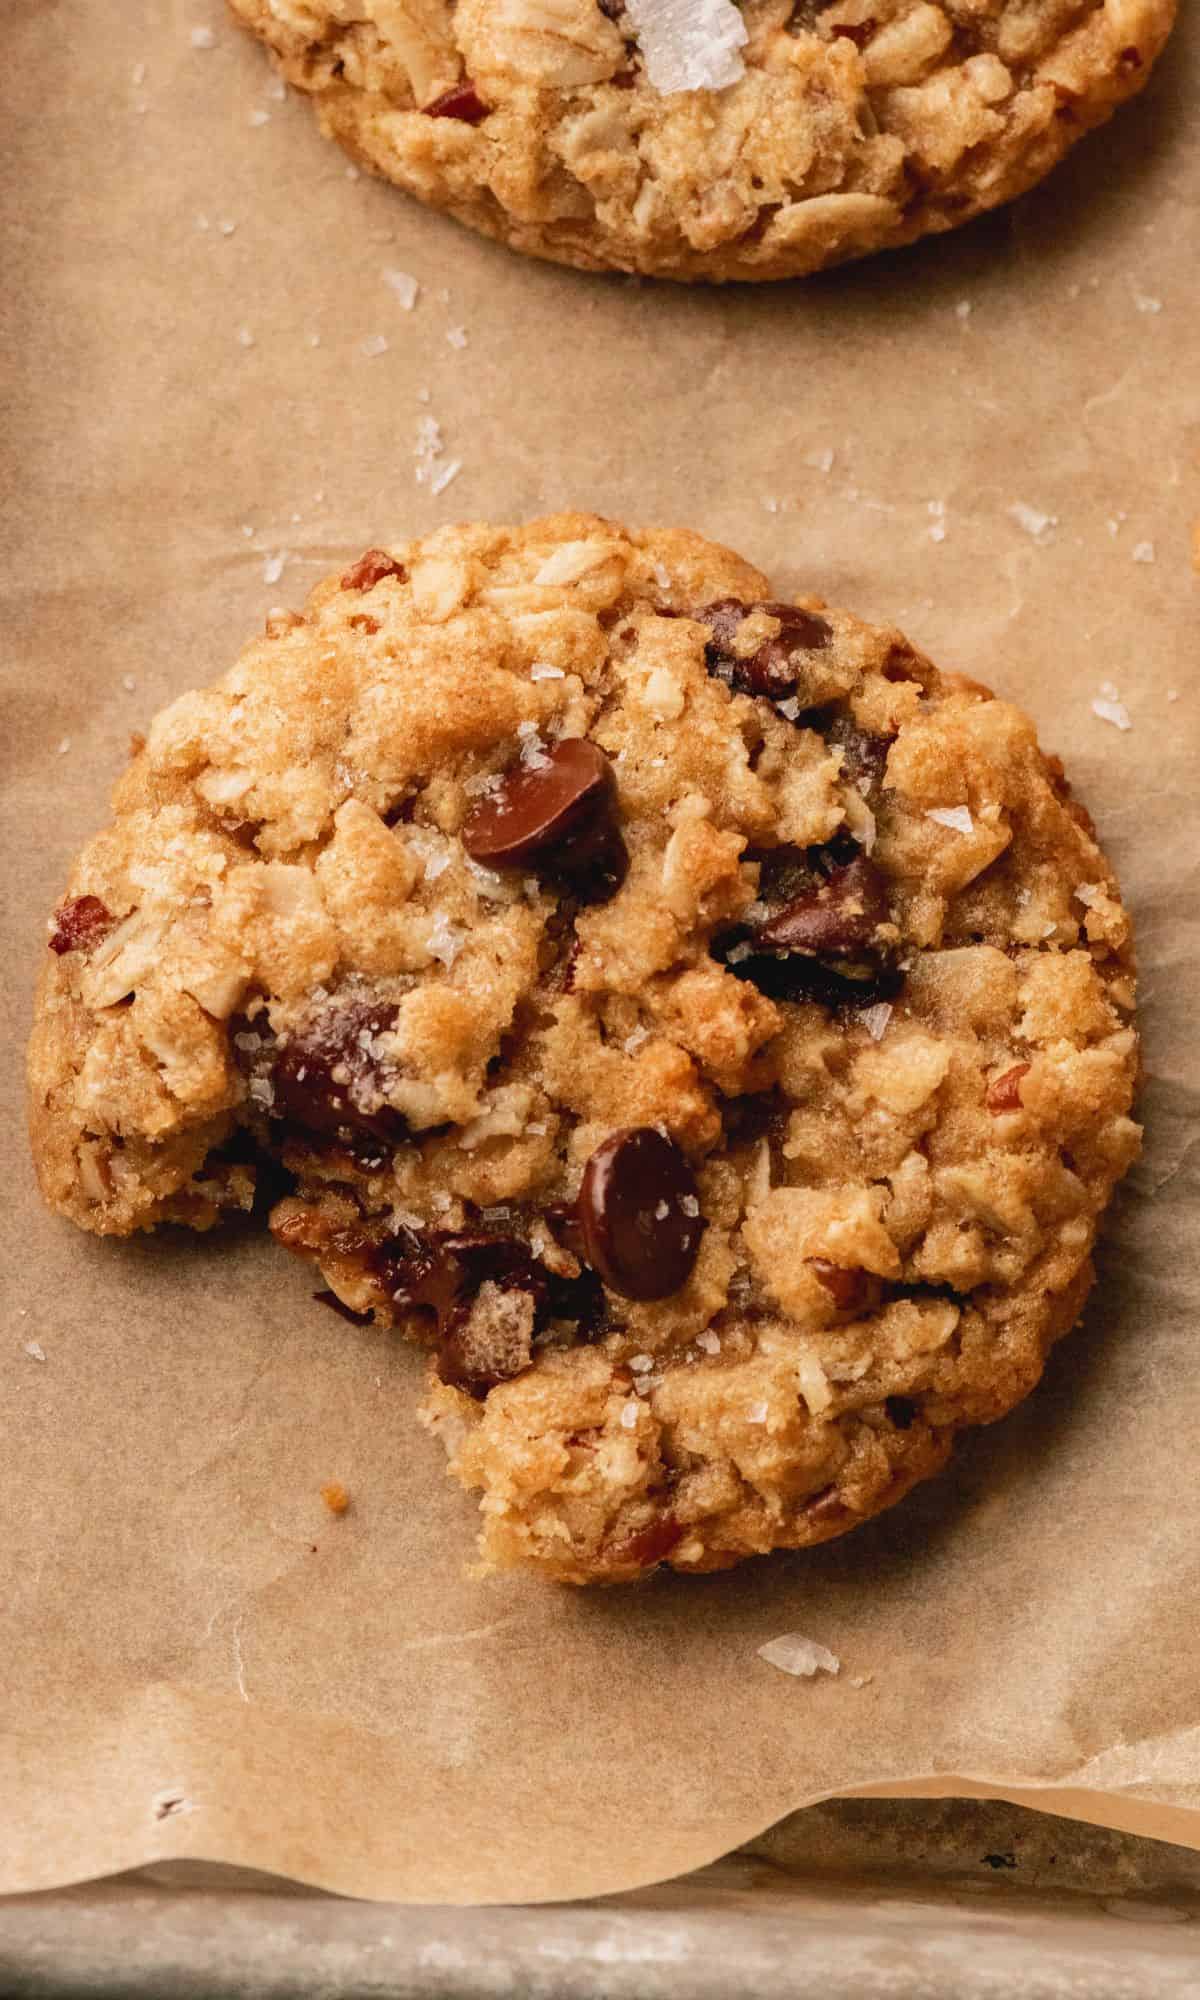 An oatmeal chocoalte chip cookie with a bite take out of it on a baking sheet.